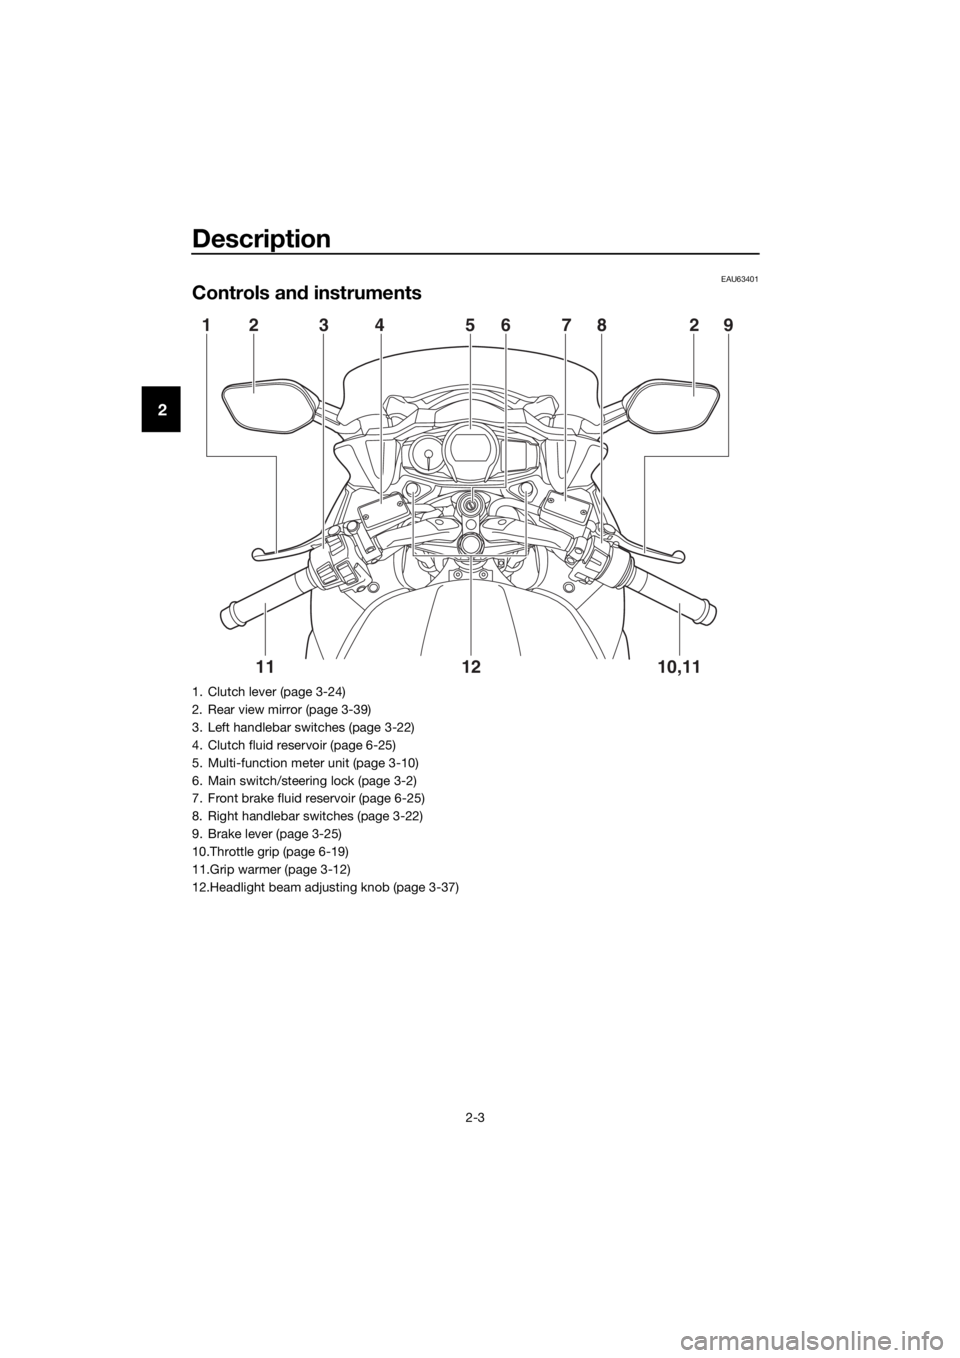 YAMAHA FJR1300A 2016  Owners Manual Description
2-3
2
EAU63401
Controls and instruments
12 3 4 5678 29
10,11
12
11
1. Clutch lever (page 3-24)
2. Rear view mirror (page 3-39)
3. Left handlebar switches (page 3-22)
4. Clutch fluid reserv